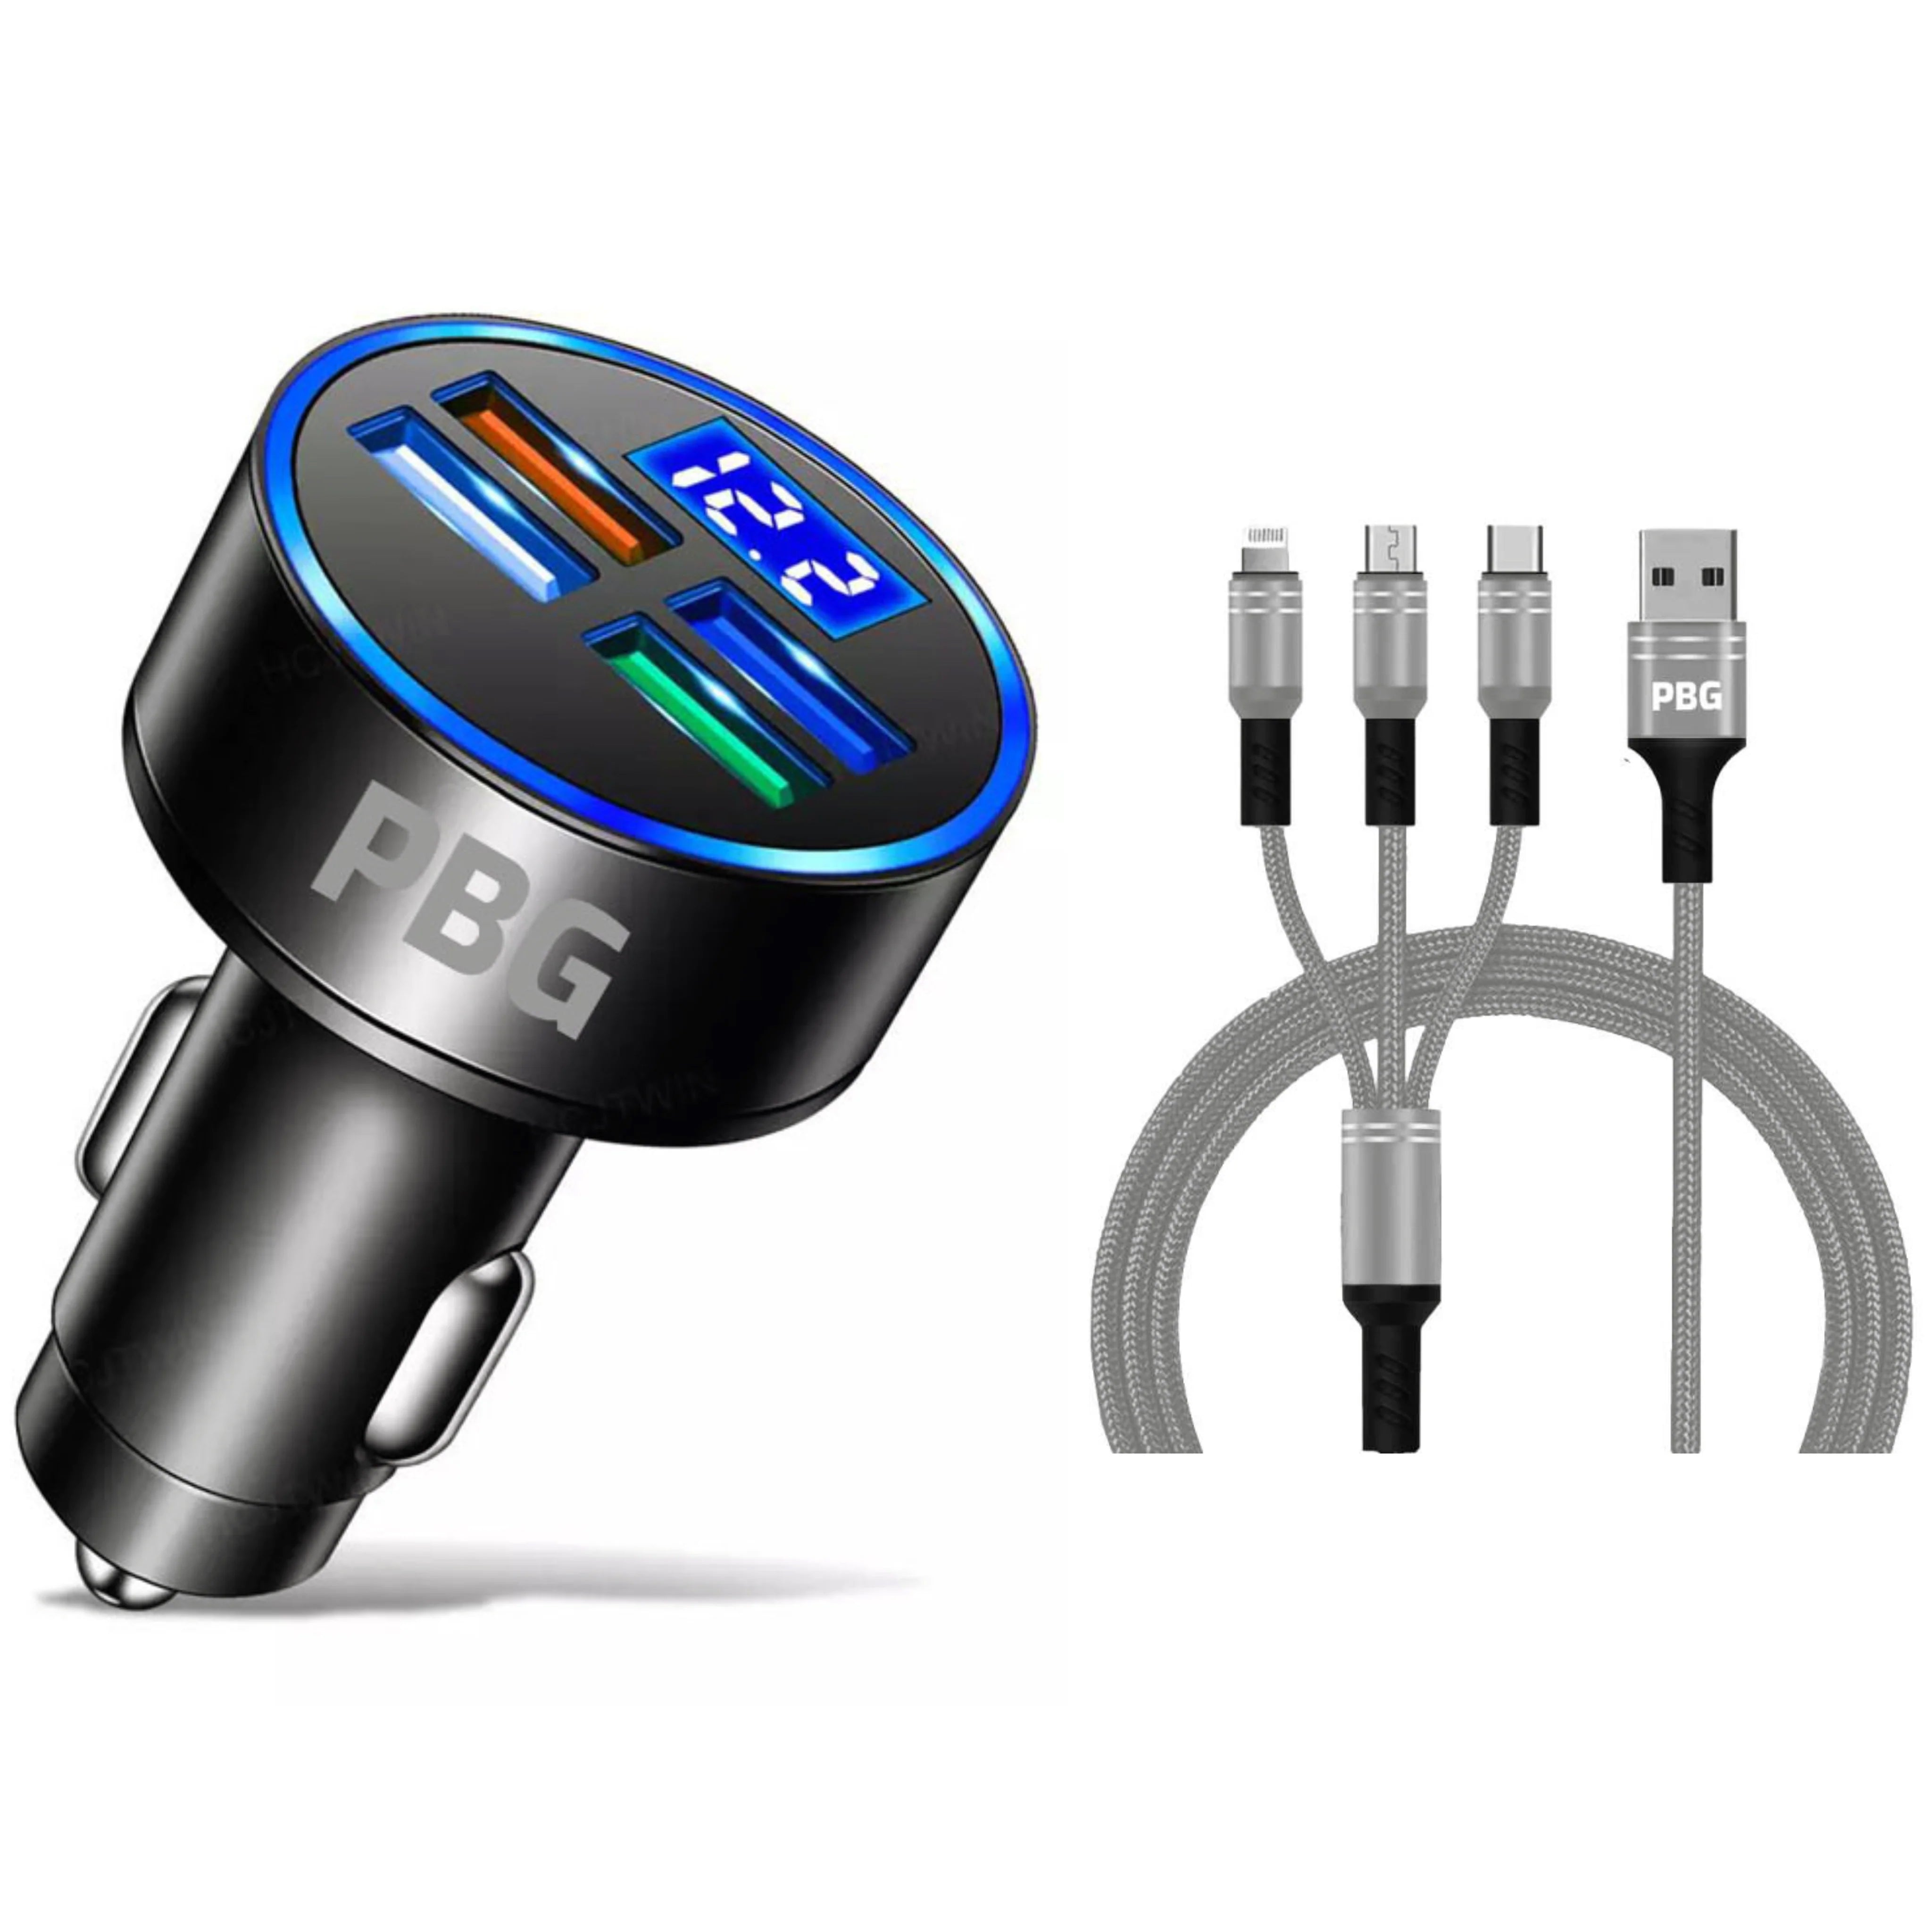 PBG LED 4 Port Car Charger Voltage Display and 3-in-1 Cable Bundle